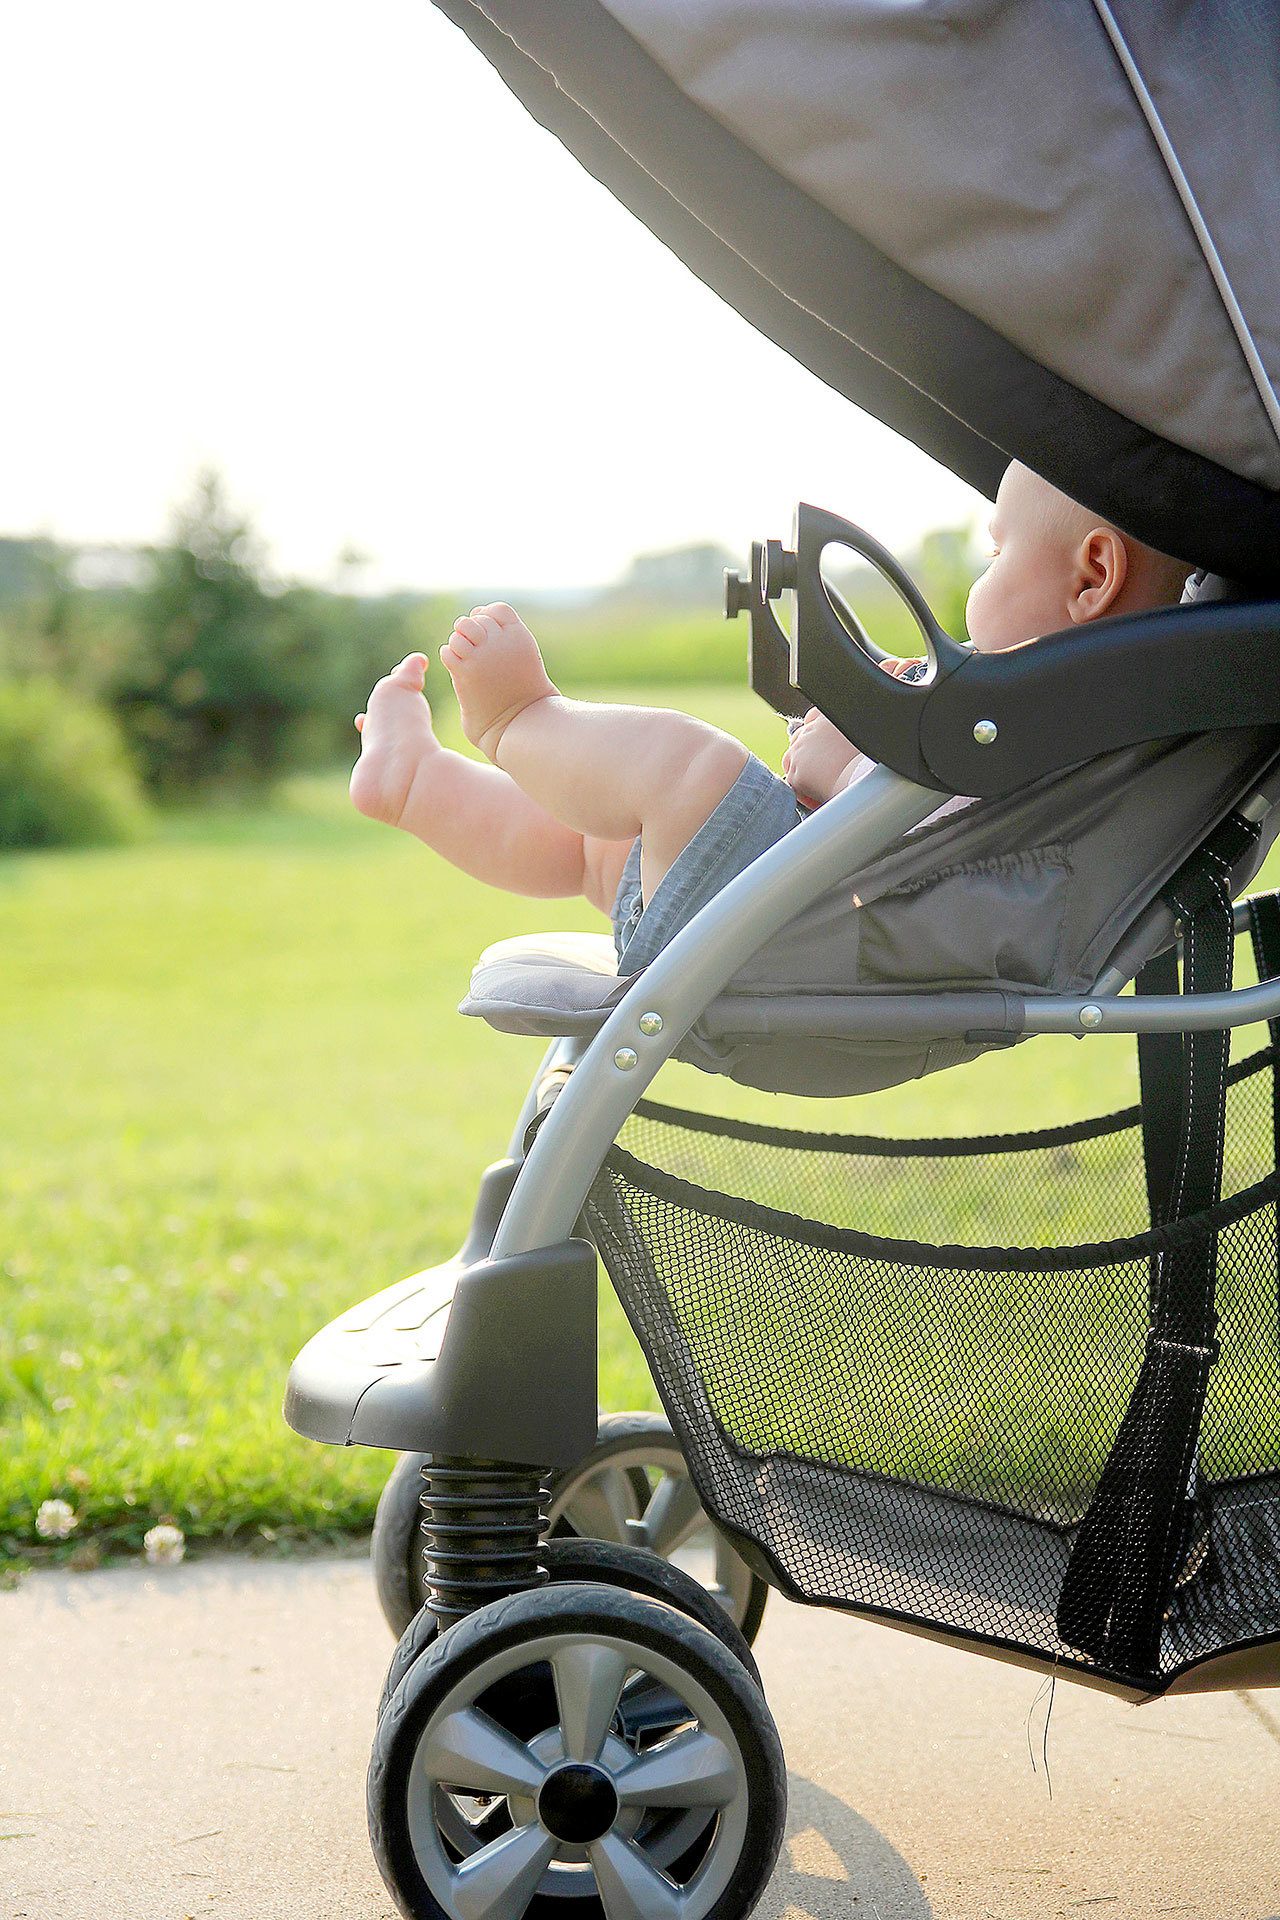 A study has found that from 1990 to 2010, a yearly average of 17,187 children under 5 suffered injuries associated with baby strollers and carriers. (Christin Lola/Fotolia)